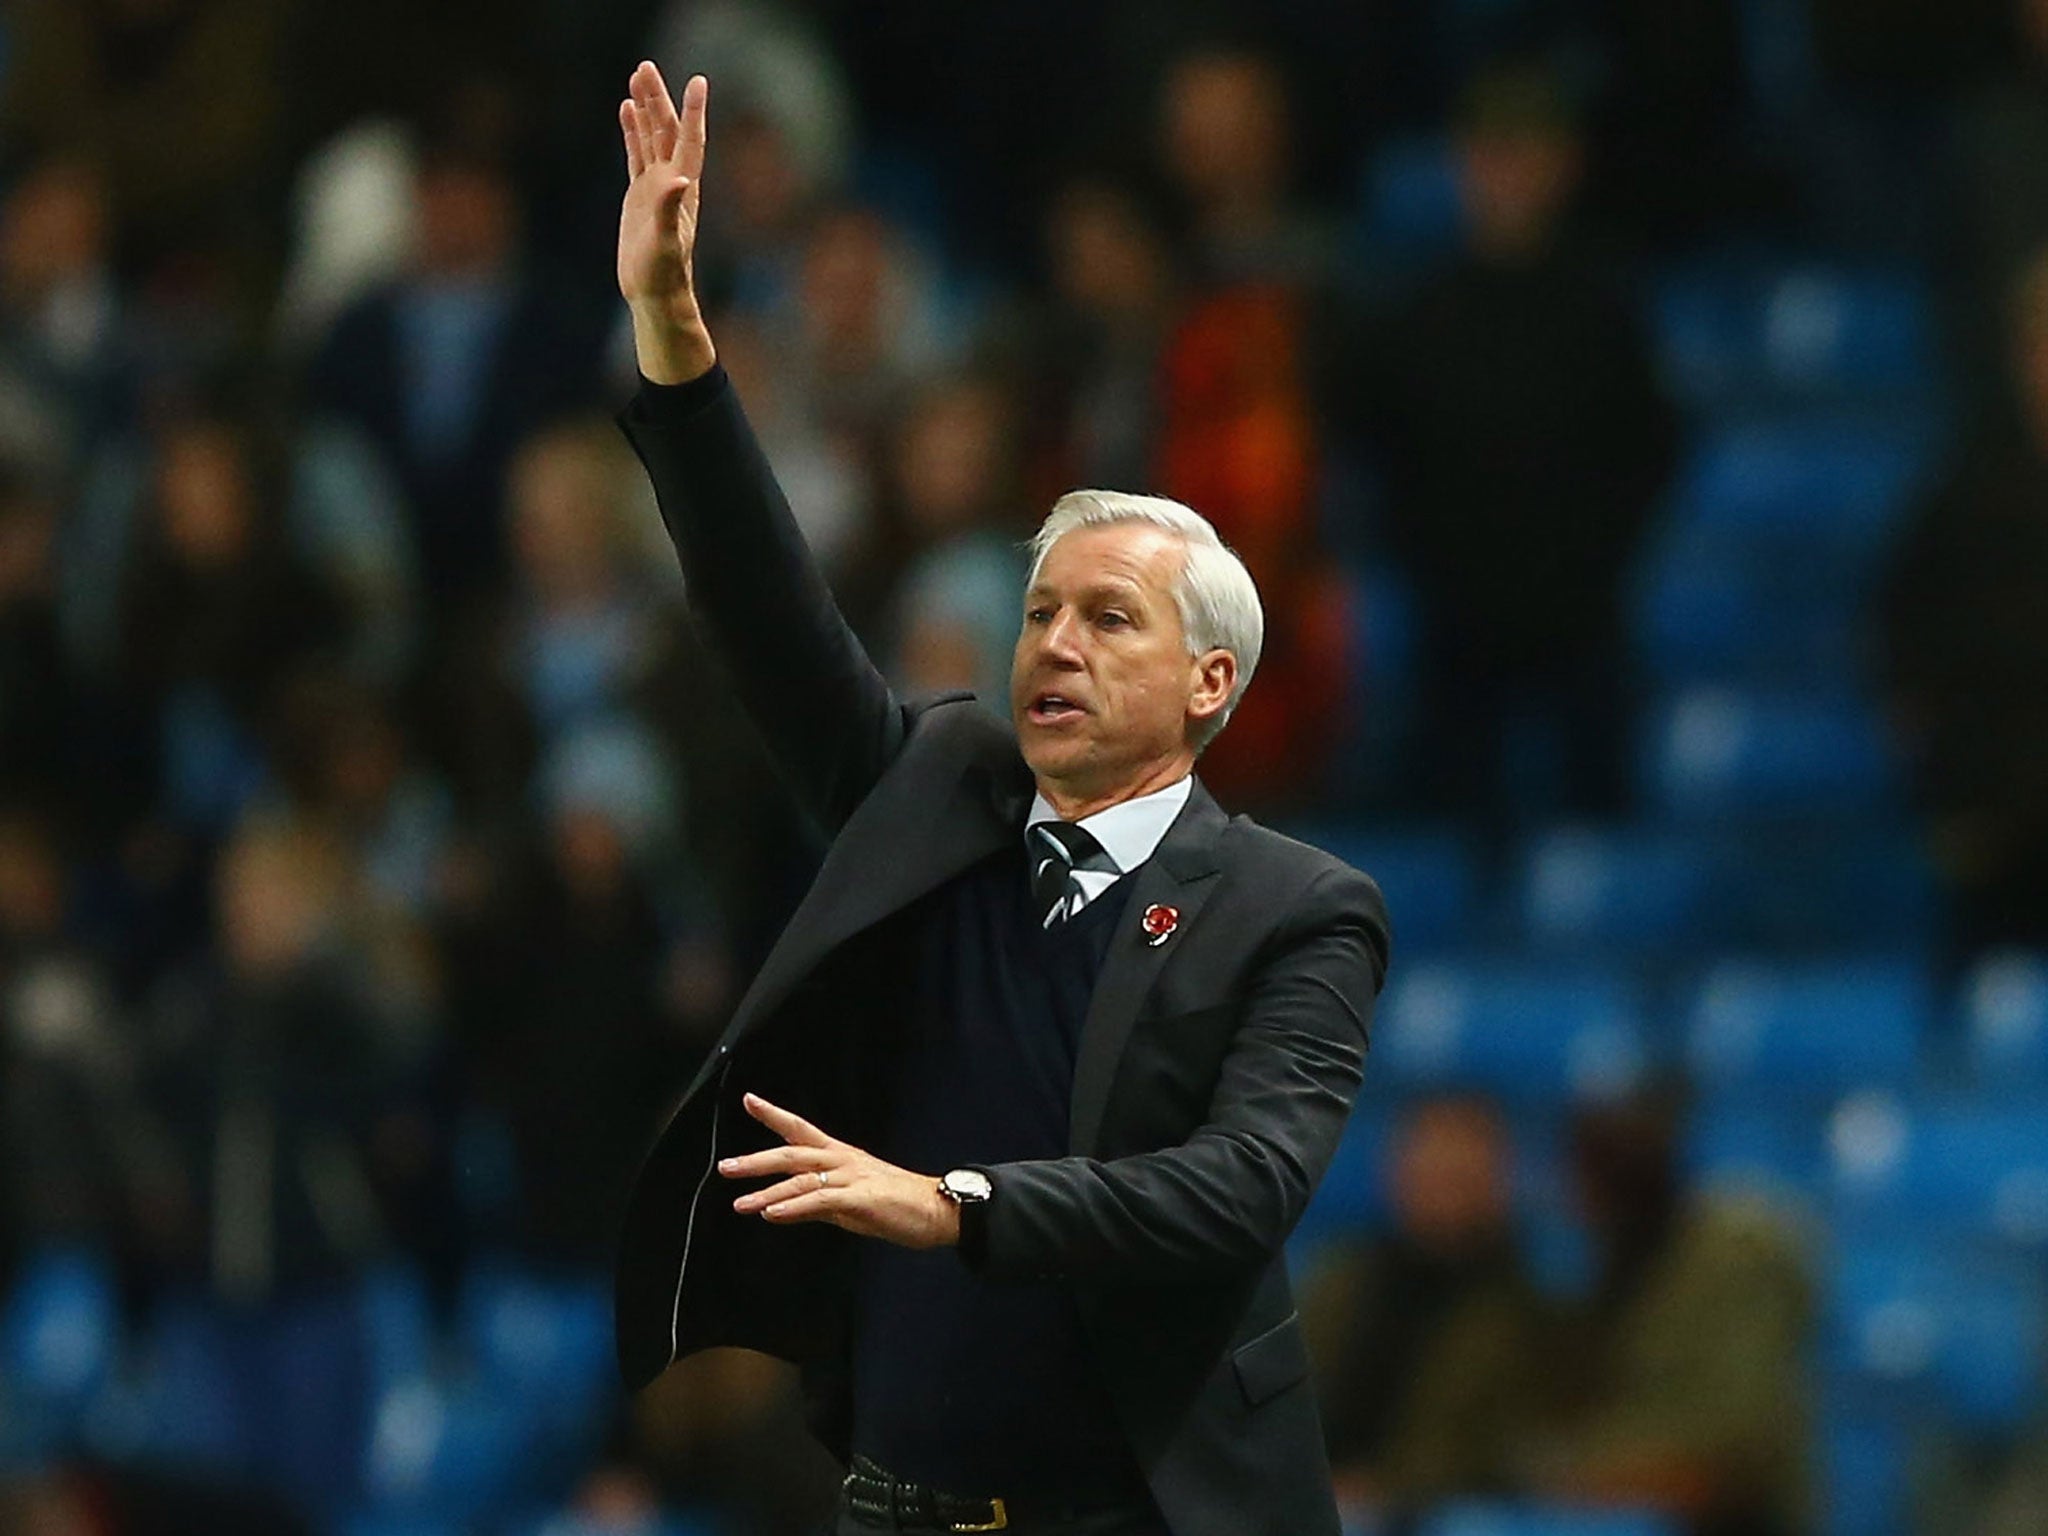 Alan Pardew makes a gesture on the touchline last night